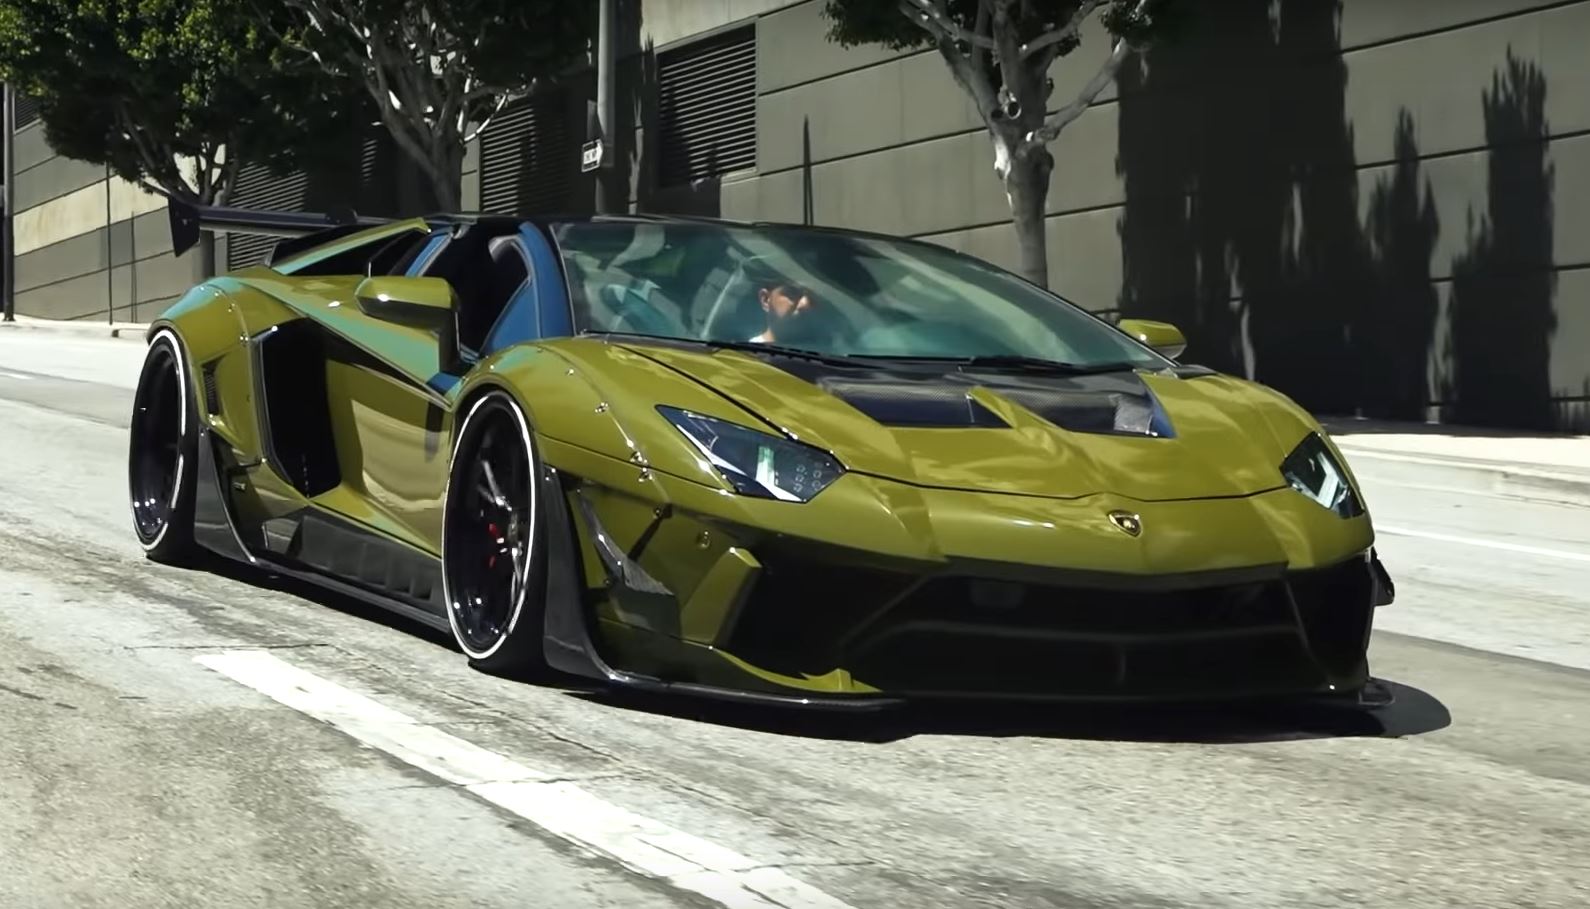 Lowest Aventador Combines Liberty Walk Widebody With Carbon and Green Wrap  - autoevolution